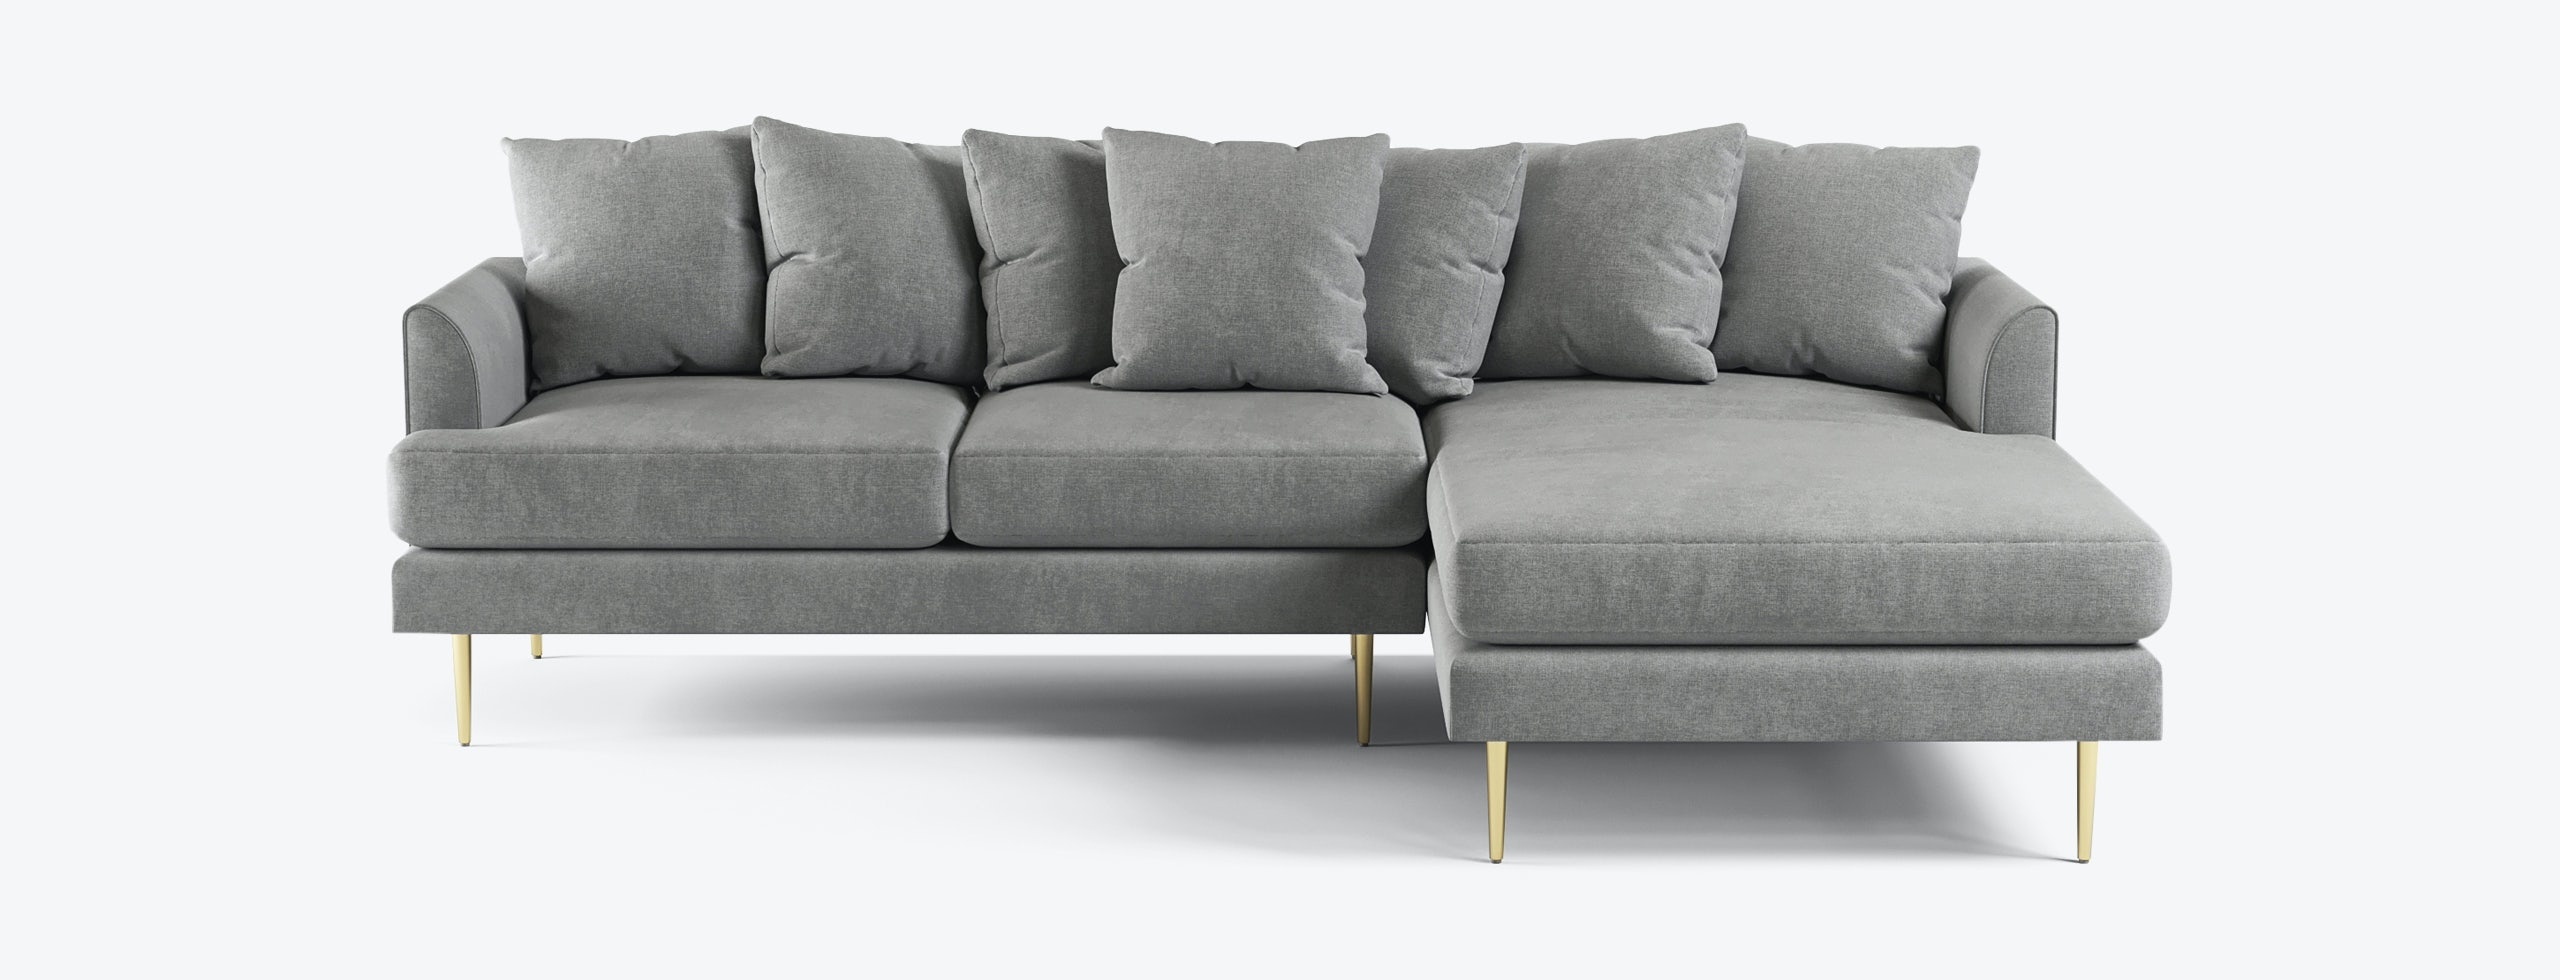 Aime Sectional- LEFT - Image 1